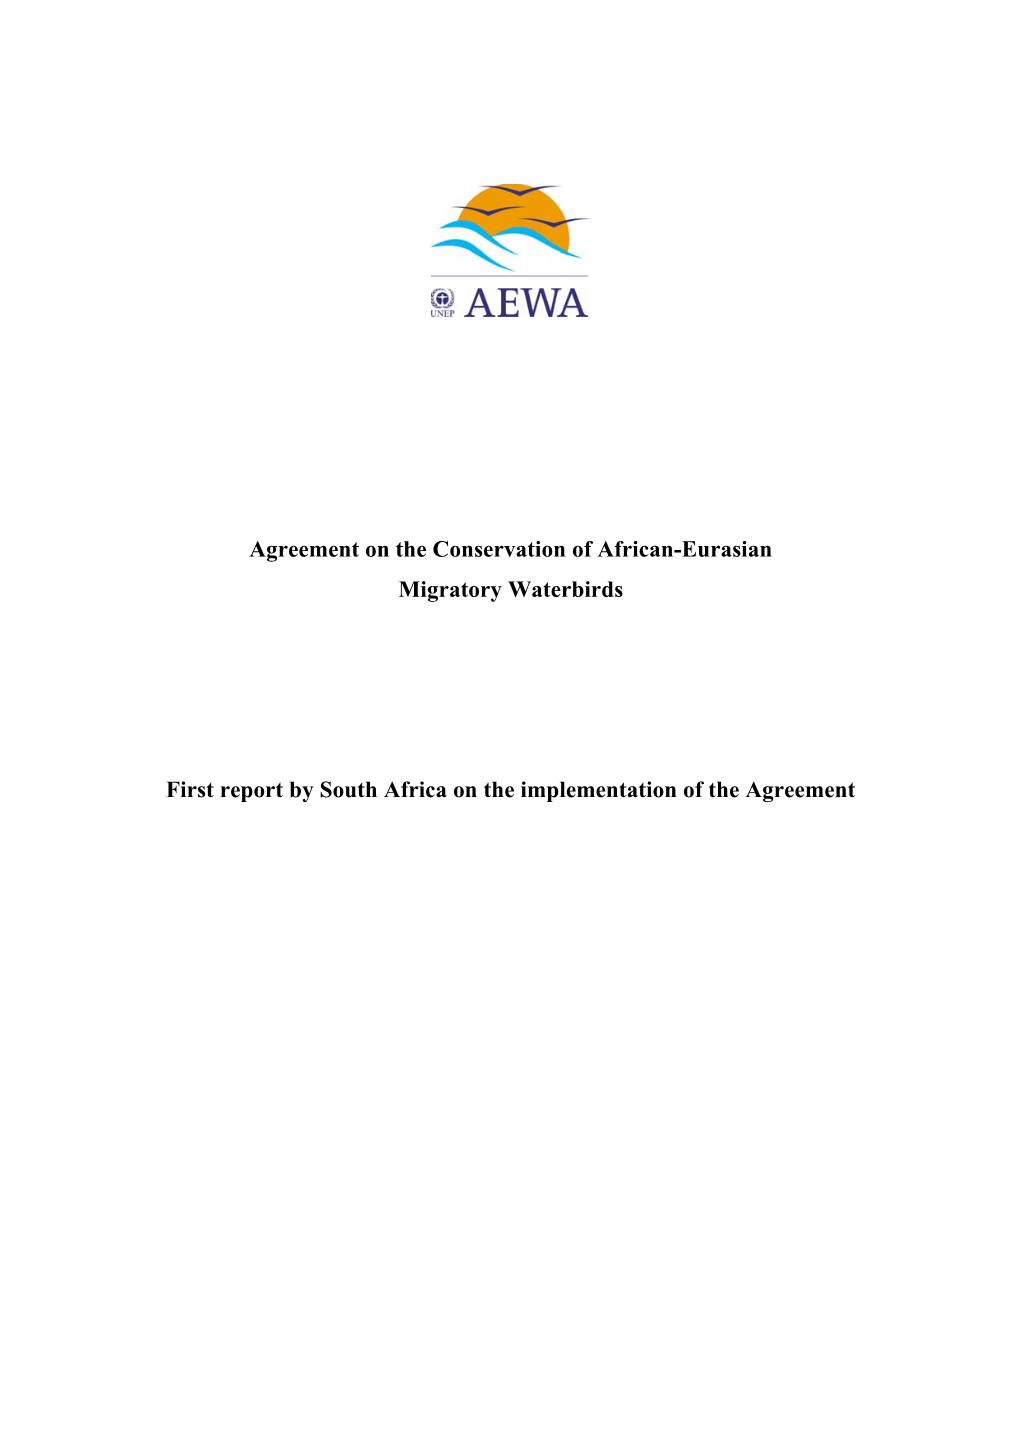 Agreement on the Conservation of African-Eurasian Migratory Waterbirds